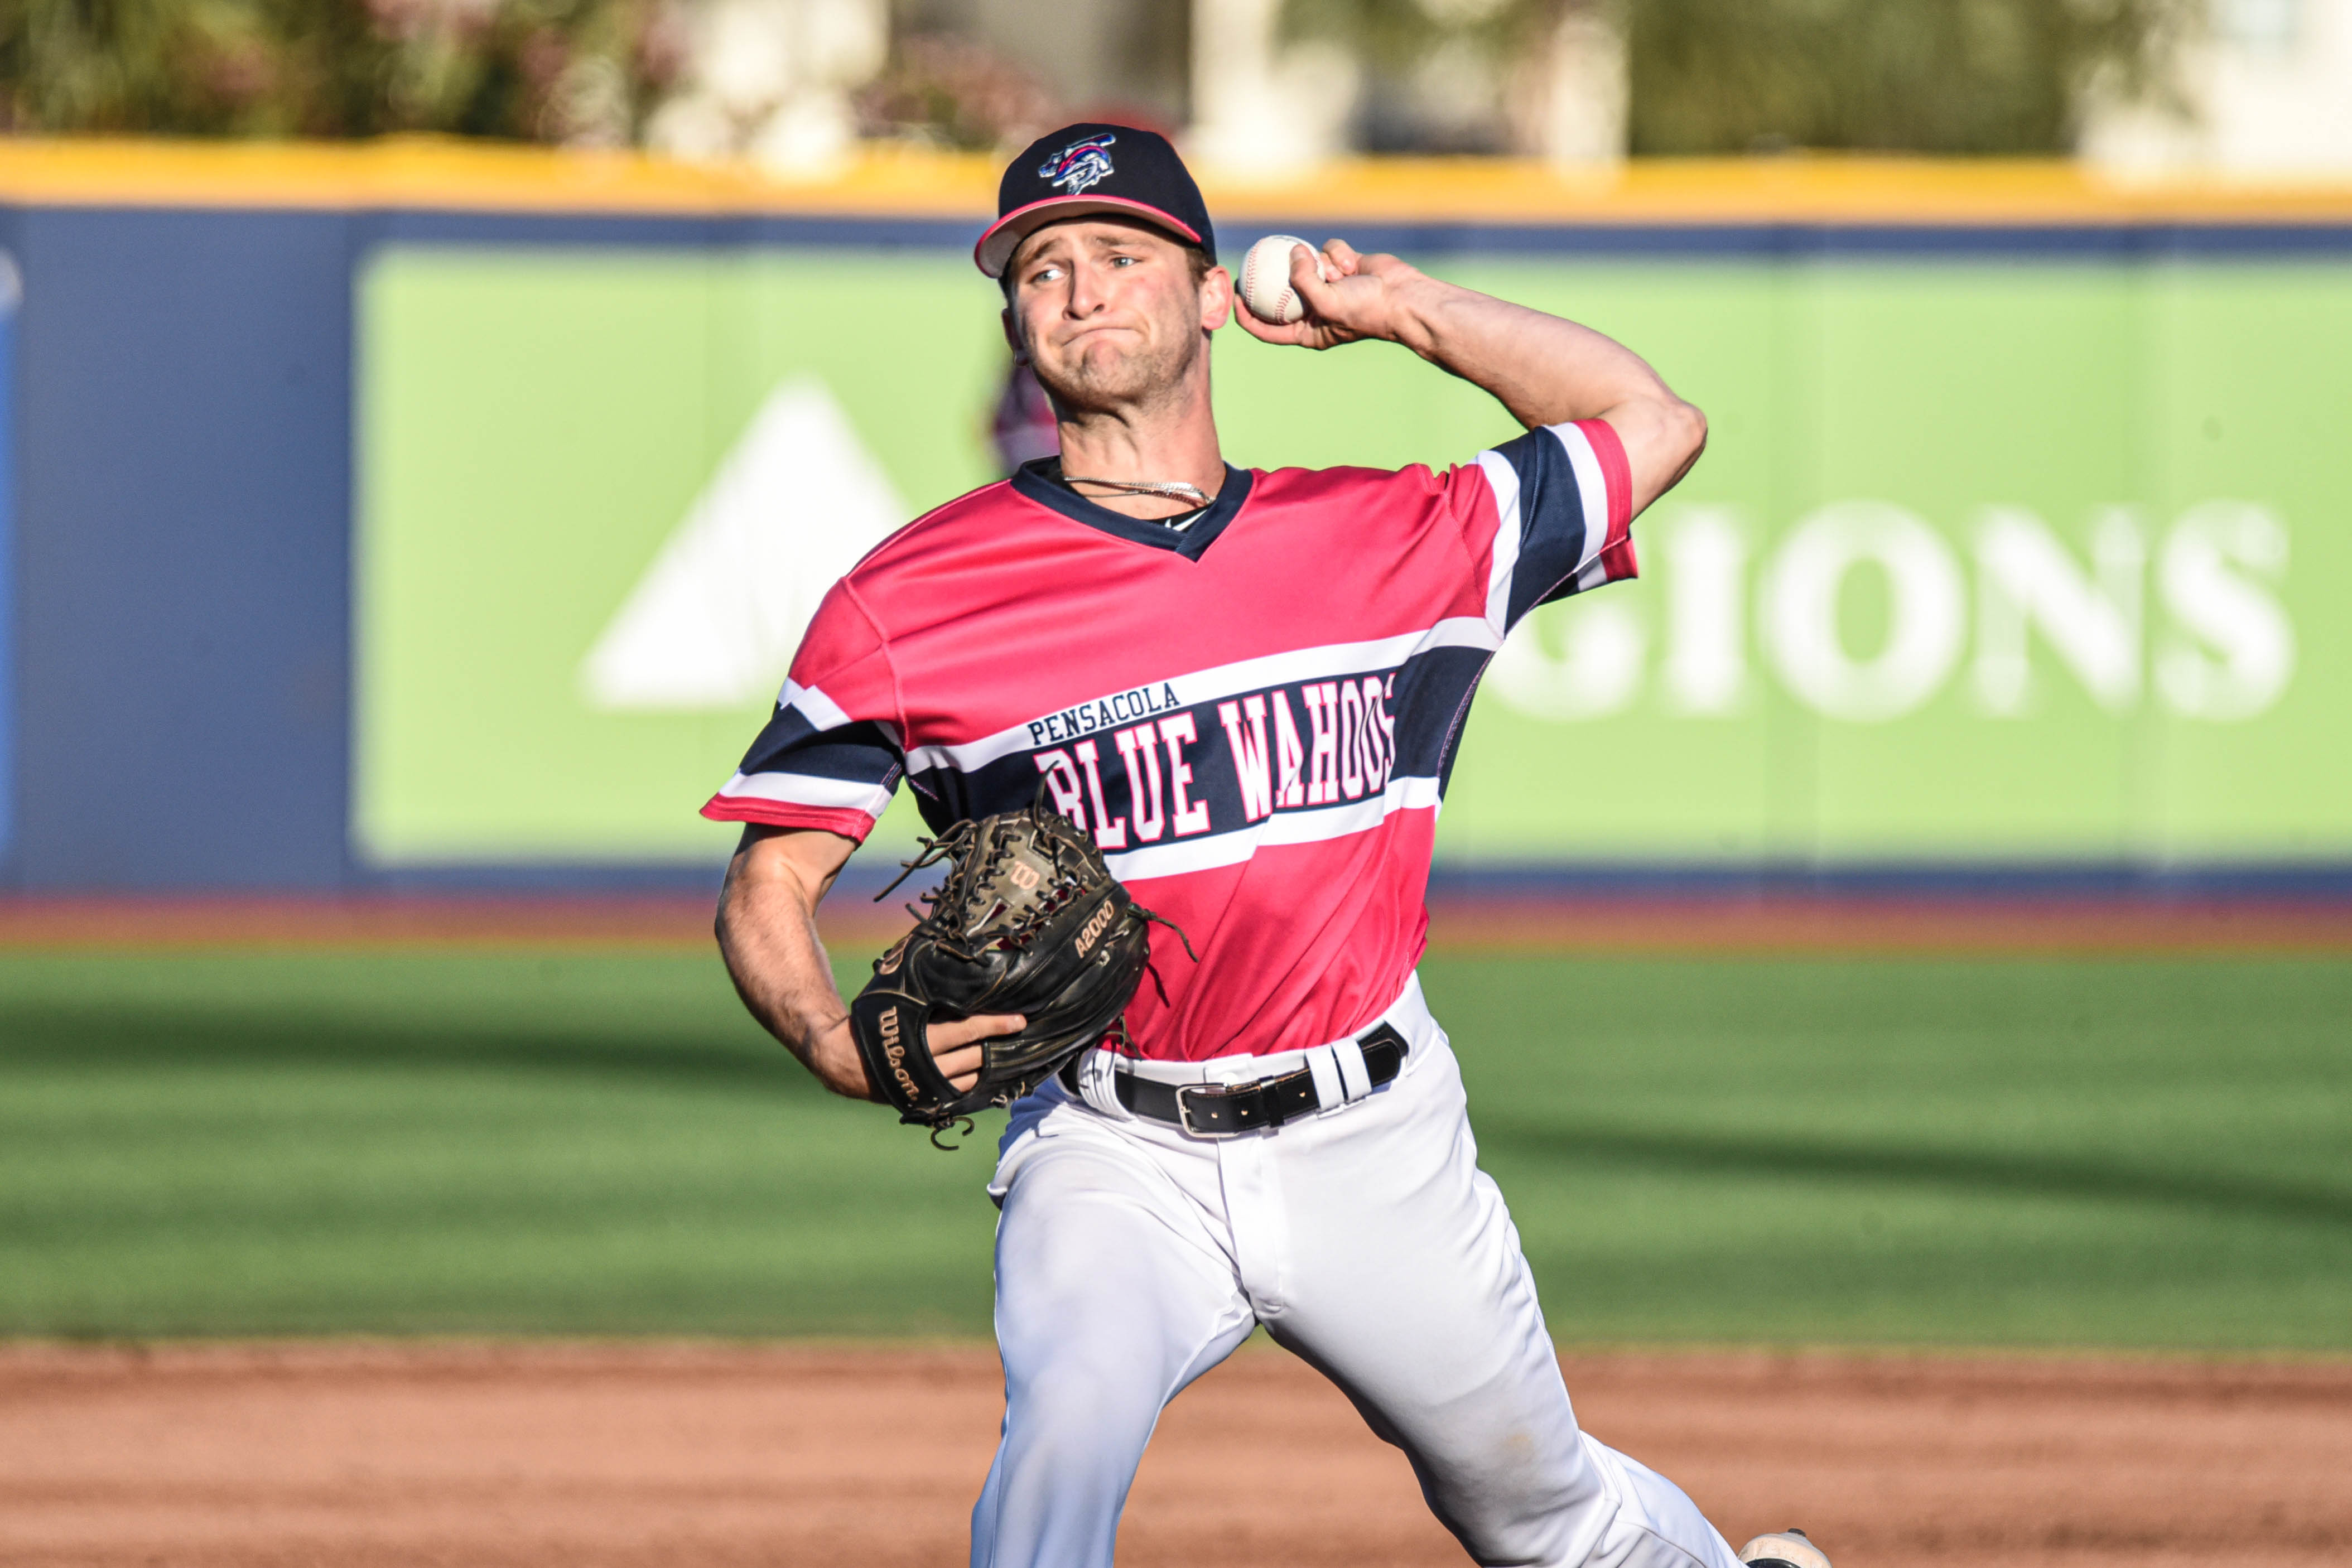 Left-handed pitcher Josh Simpson playing for the Double-A Pensacola Blue Wahoos in the Miami Marlins organization